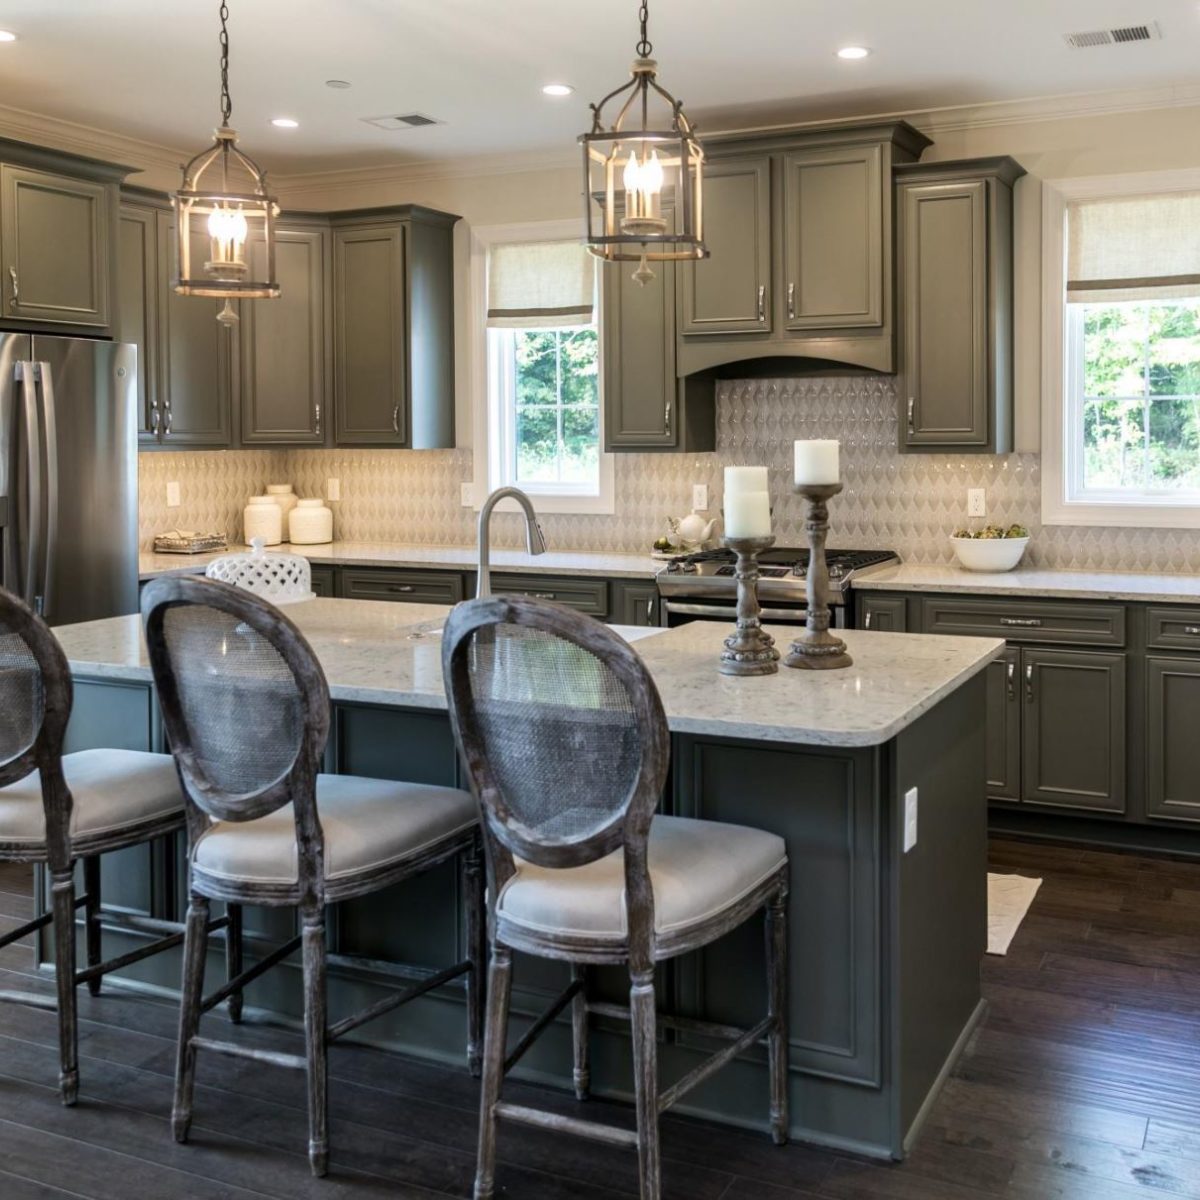 A Culture Built to Last | Our Story | Regency Homebuilders